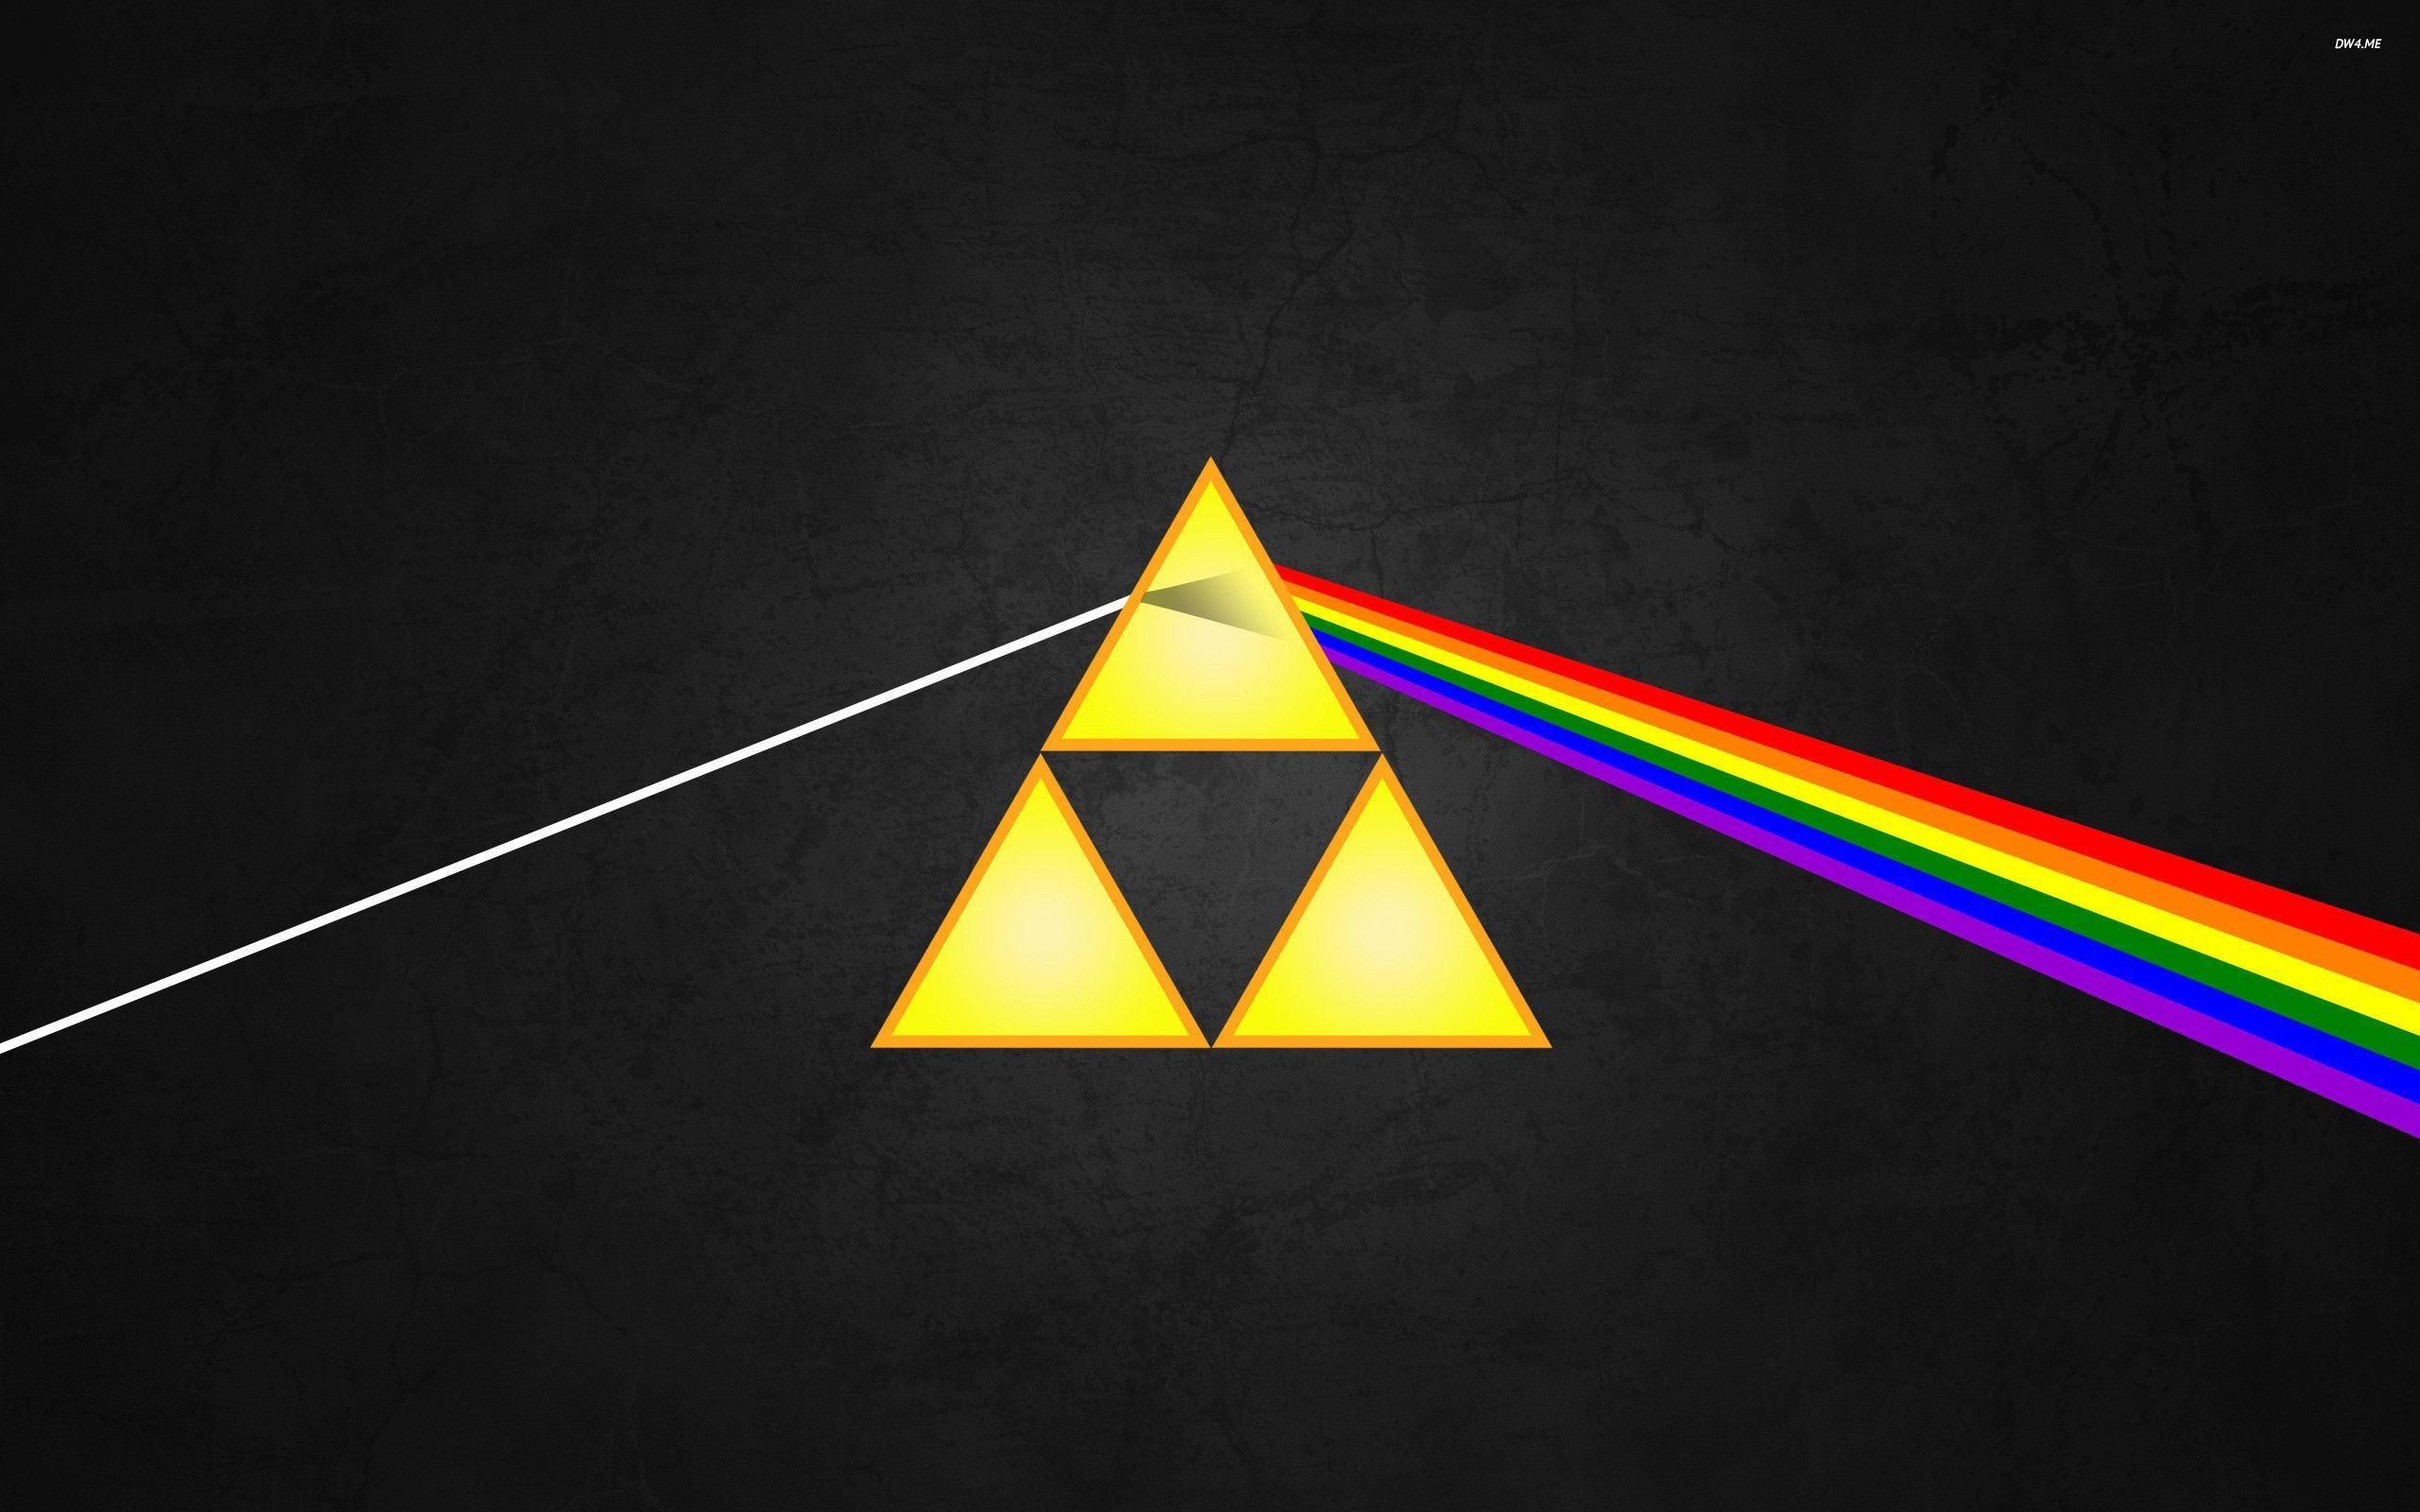 The dark side of the Triforce wallpaper